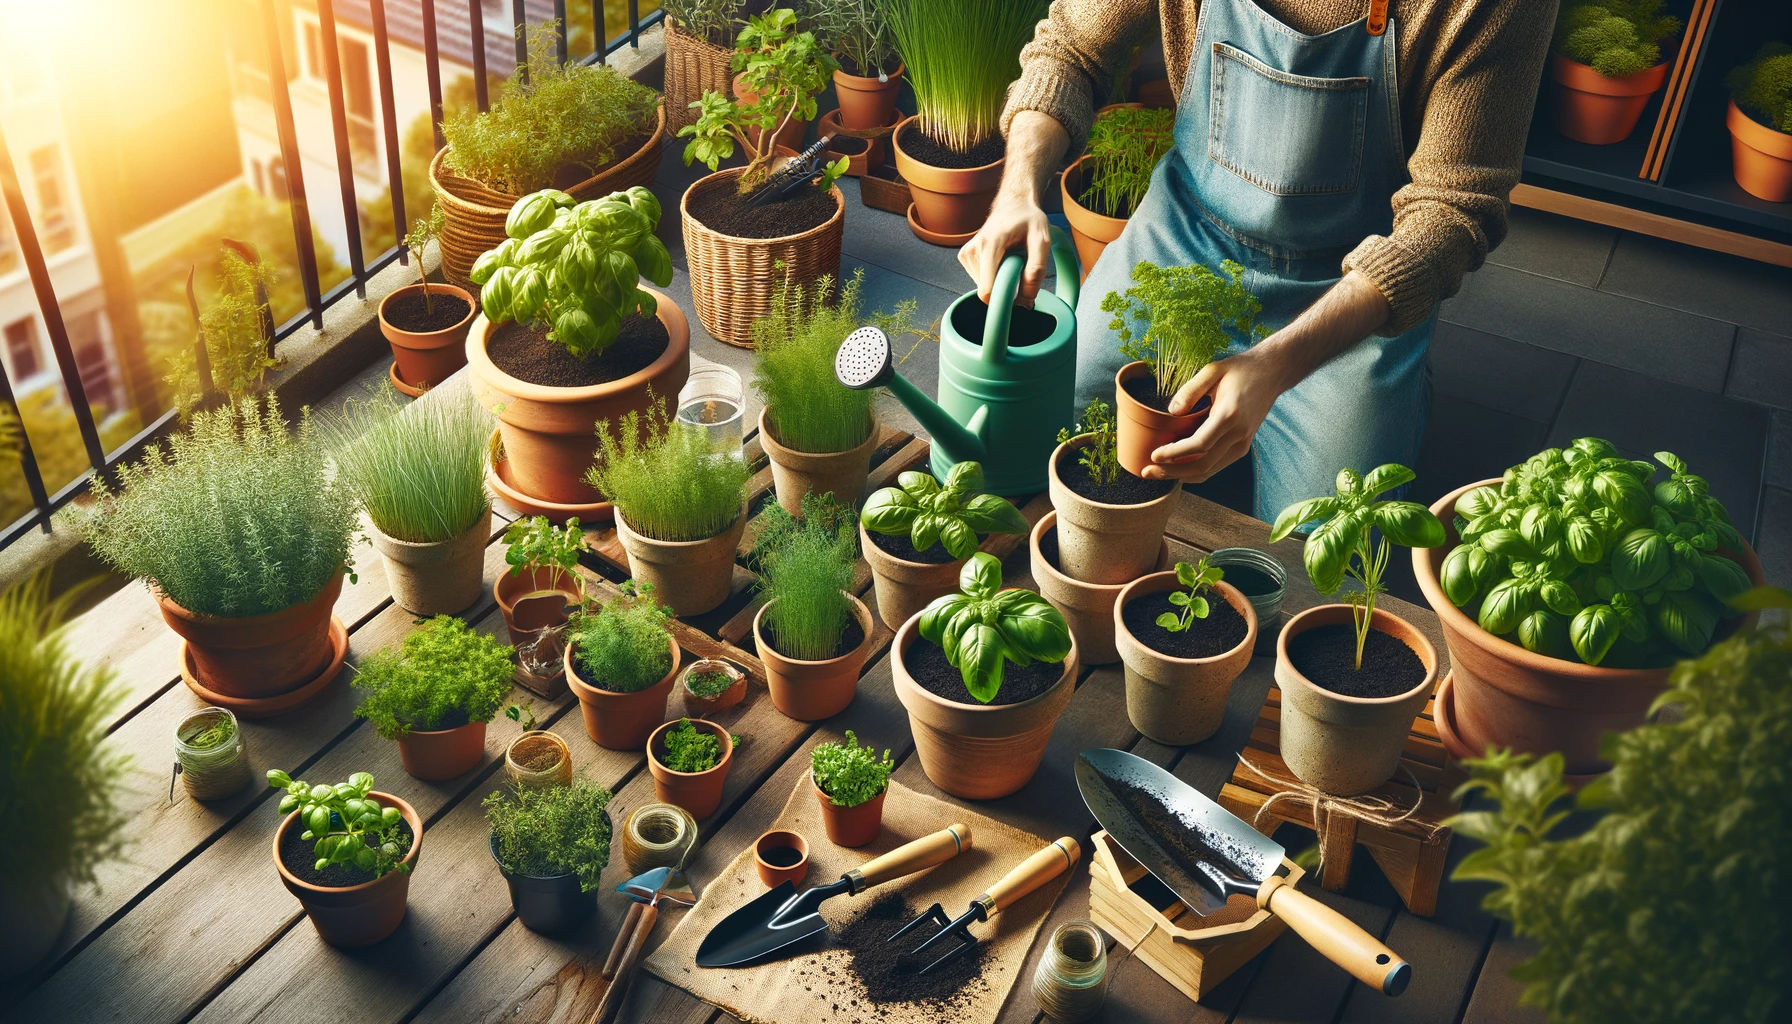 A person planting and arranging herb pots in a garden or on a balcony